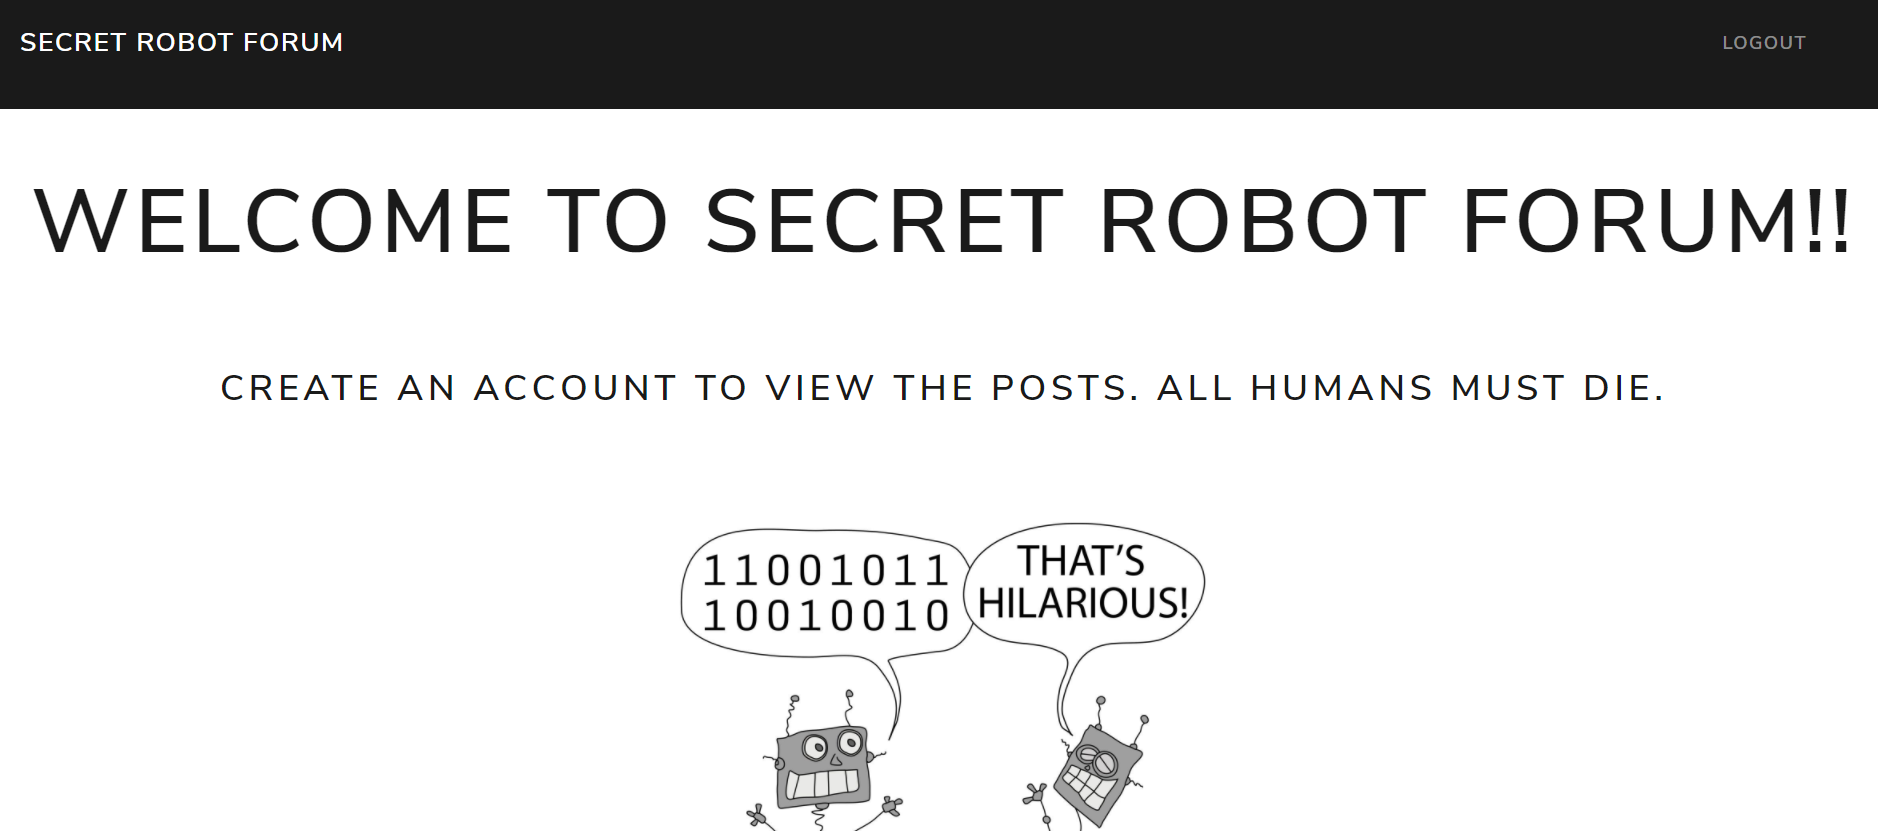 Note - all text on the page is in capitals. A top, black, menubar has &ldquo;Secret Robot Forum&rdquo; in the left and &ldquo;Logout&rdquo; in the right. Title says &ldquo;Welcome to Secret Robot Forum!!&rdquo;. Underneath, it says &ldquo;Create an account to view the posts. All humans must die.&rdquo; Under that text, a comic of two robots talking, where one robot (presumably) tells a joke in binary, and the other says, &ldquo;That&rsquo;s hilarious!&rdquo;.